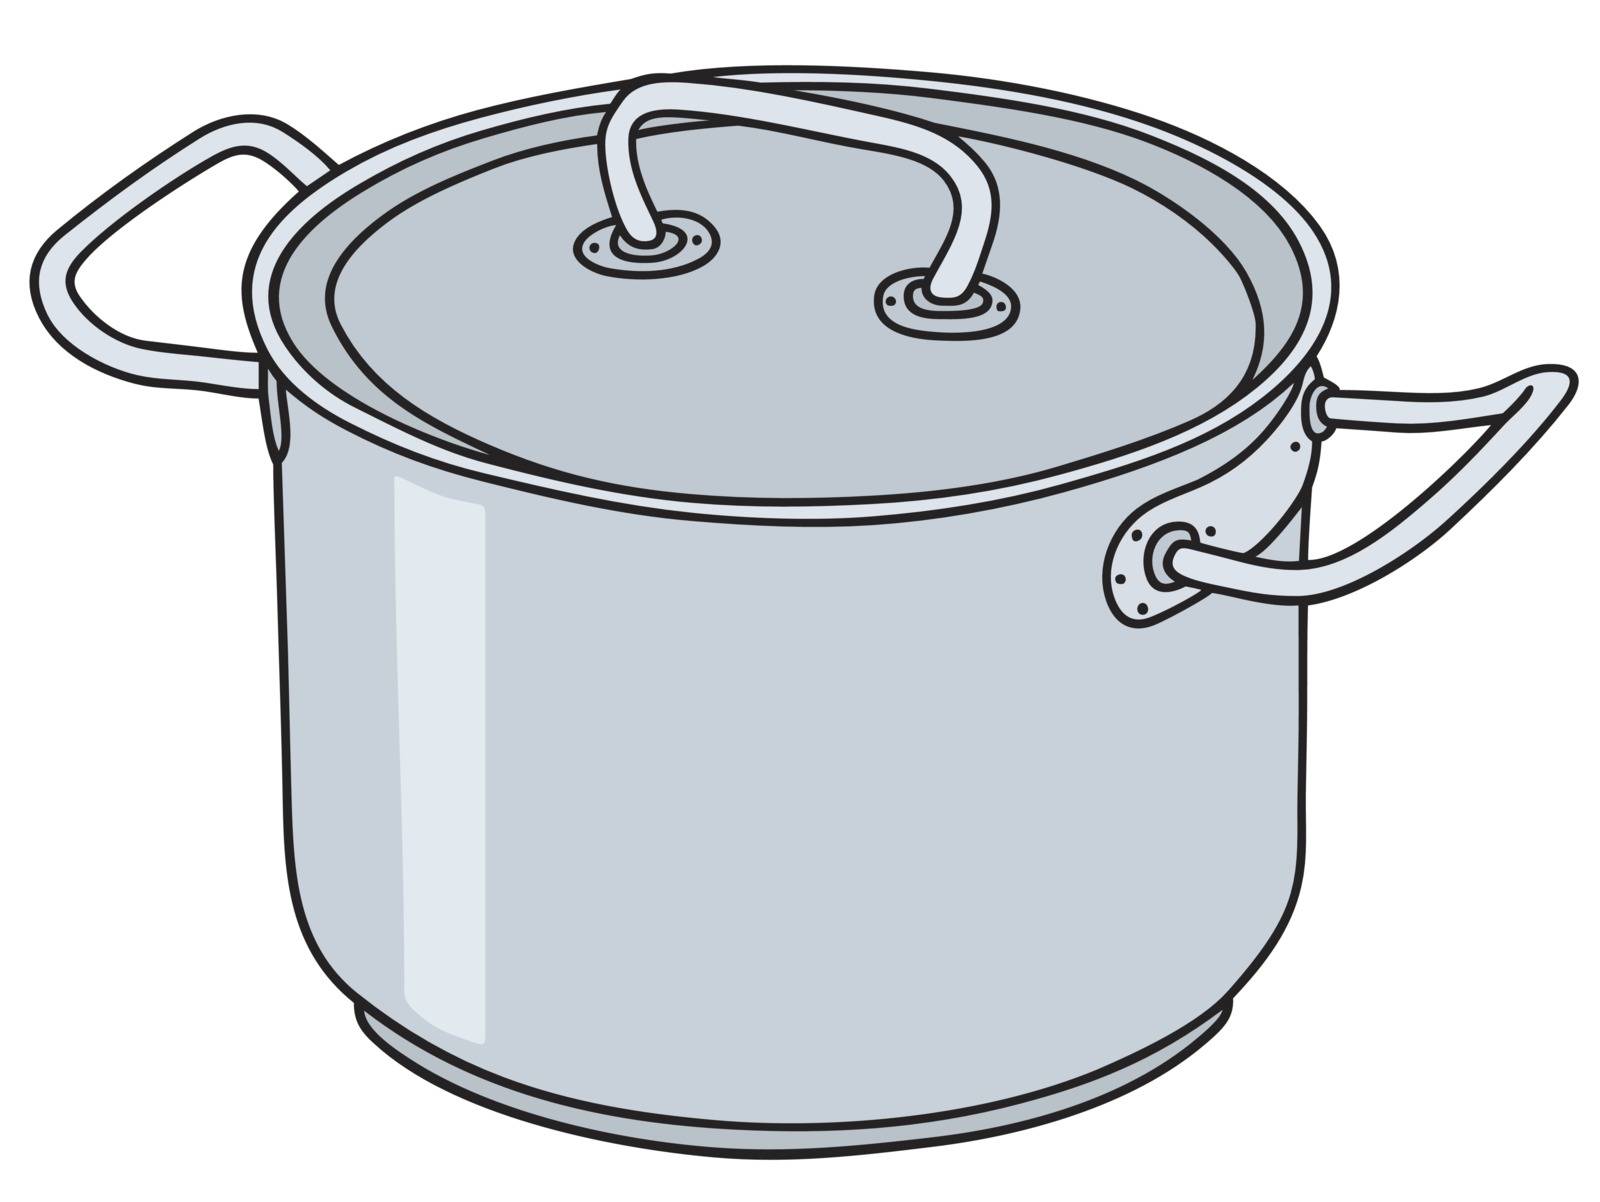 Hand drawing of a stainless steel pot